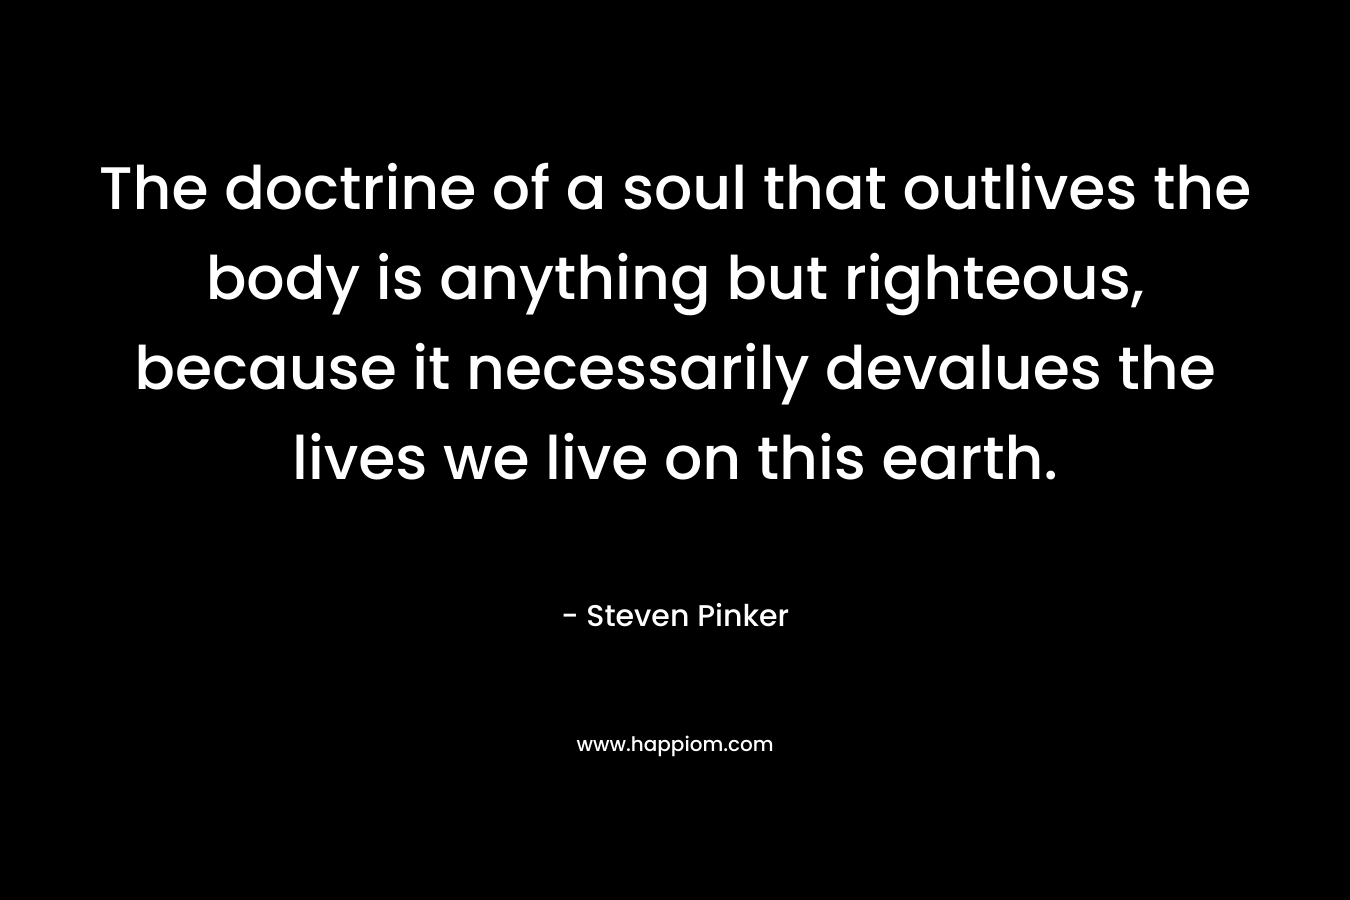 The doctrine of a soul that outlives the body is anything but righteous, because it necessarily devalues the lives we live on this earth. – Steven Pinker